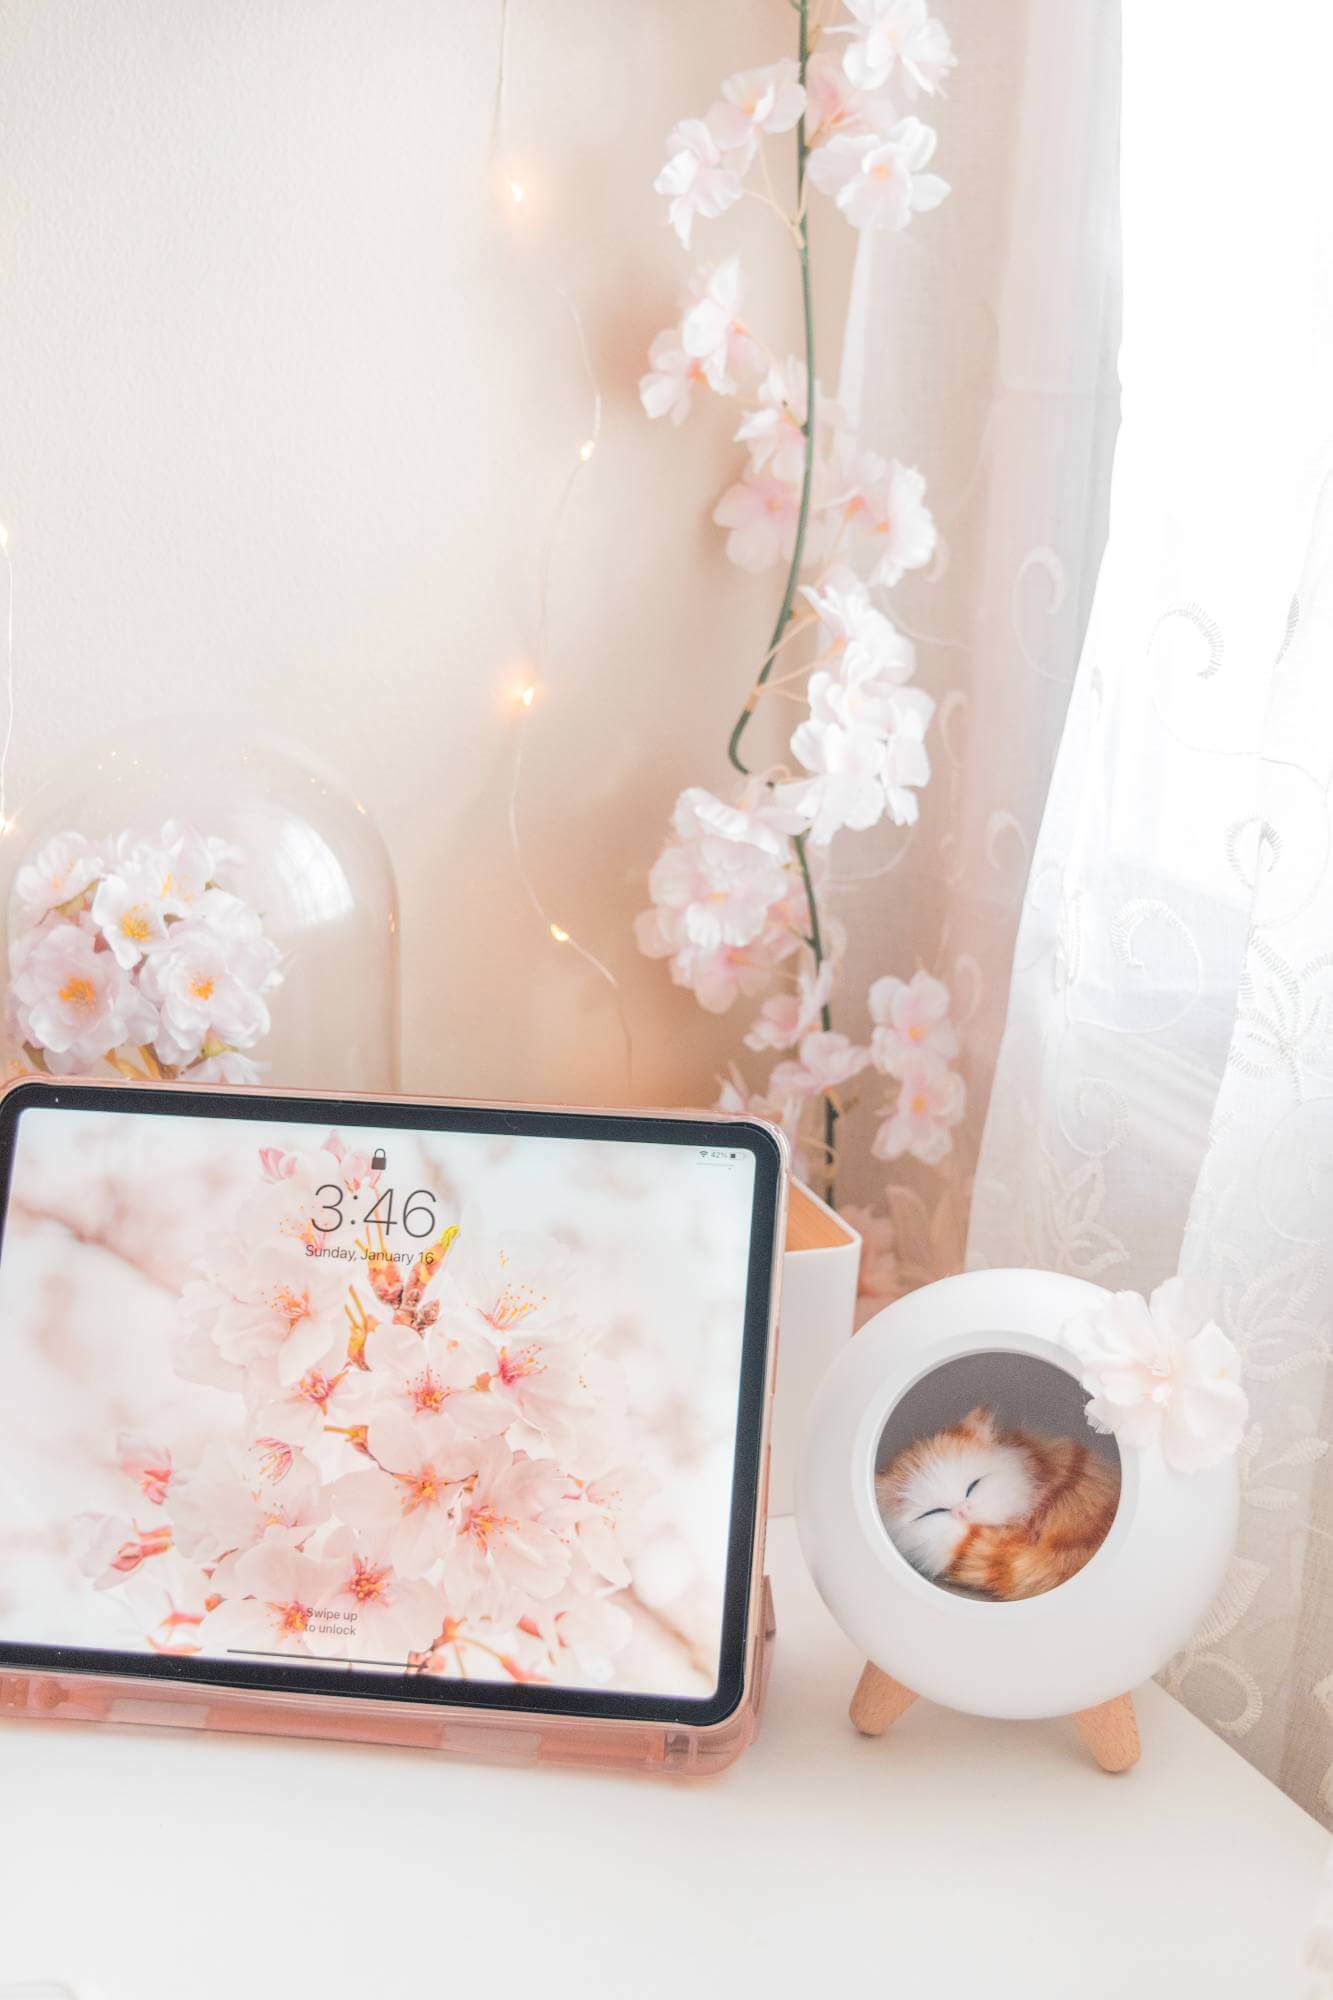 An iPad with a cherry blossom wallpaper